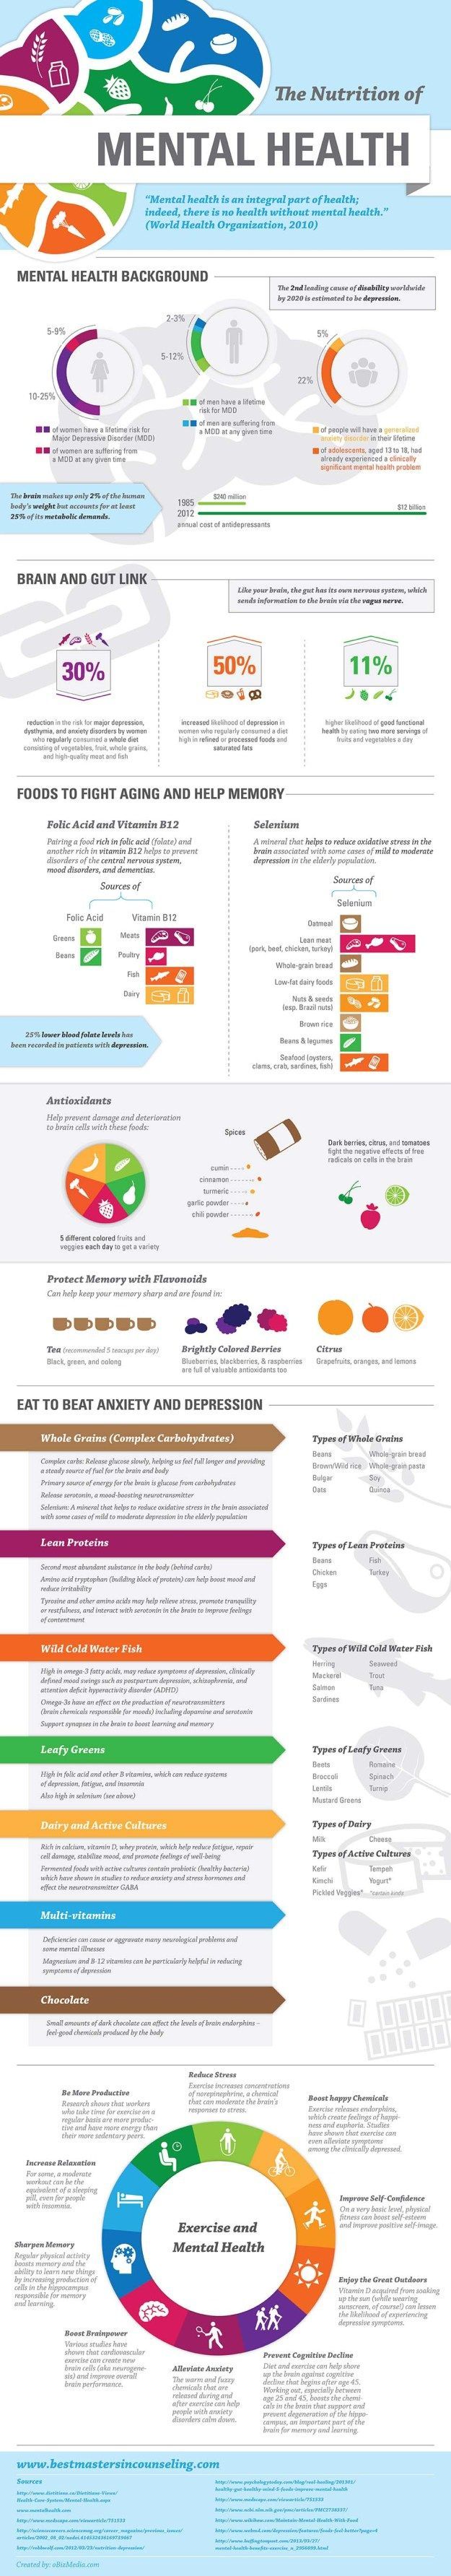 Nutrition and mental health [infographic]